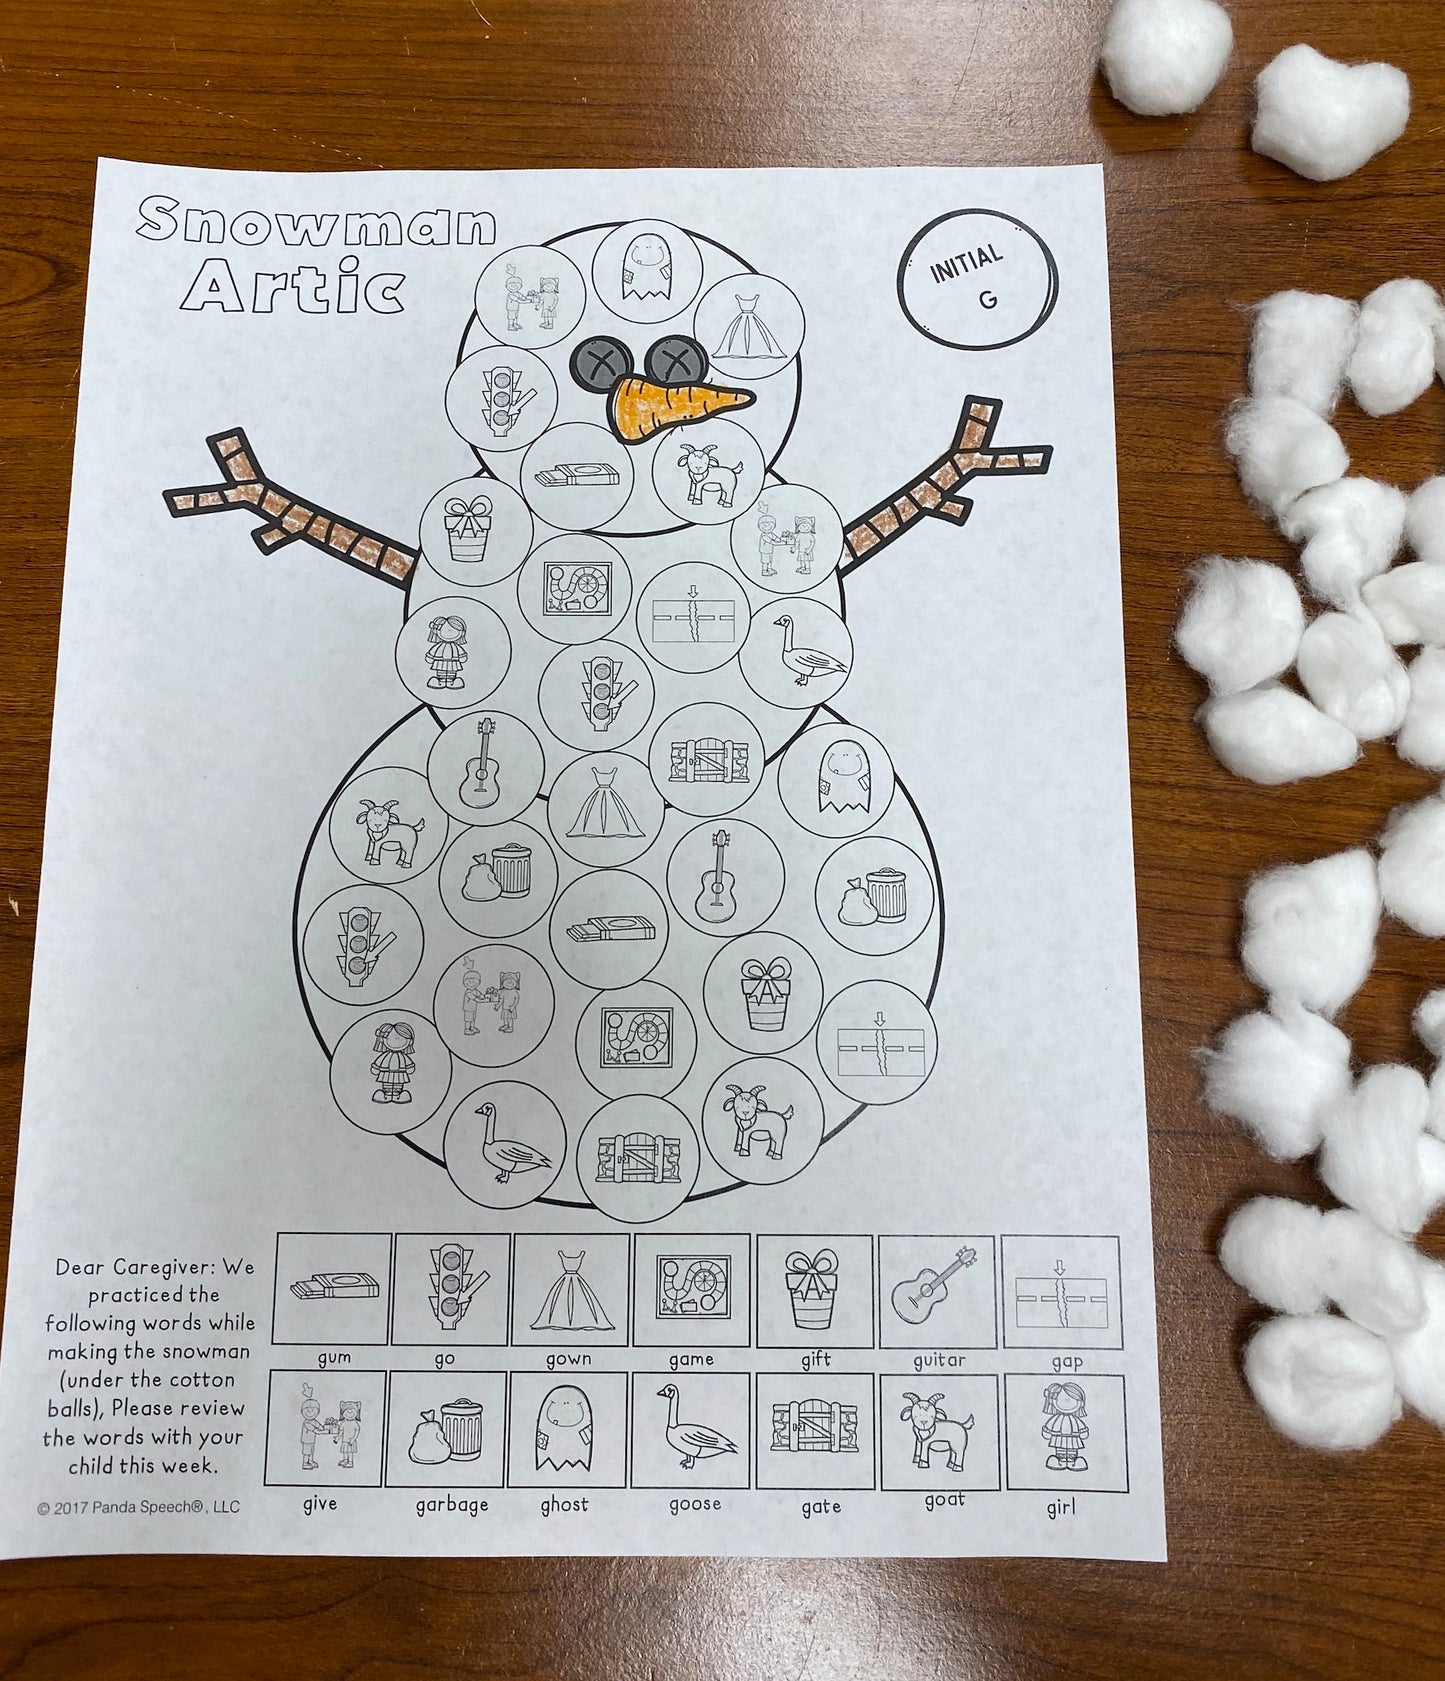 Snowman Articulation and Language! Speech Therapy Cotton Ball craft